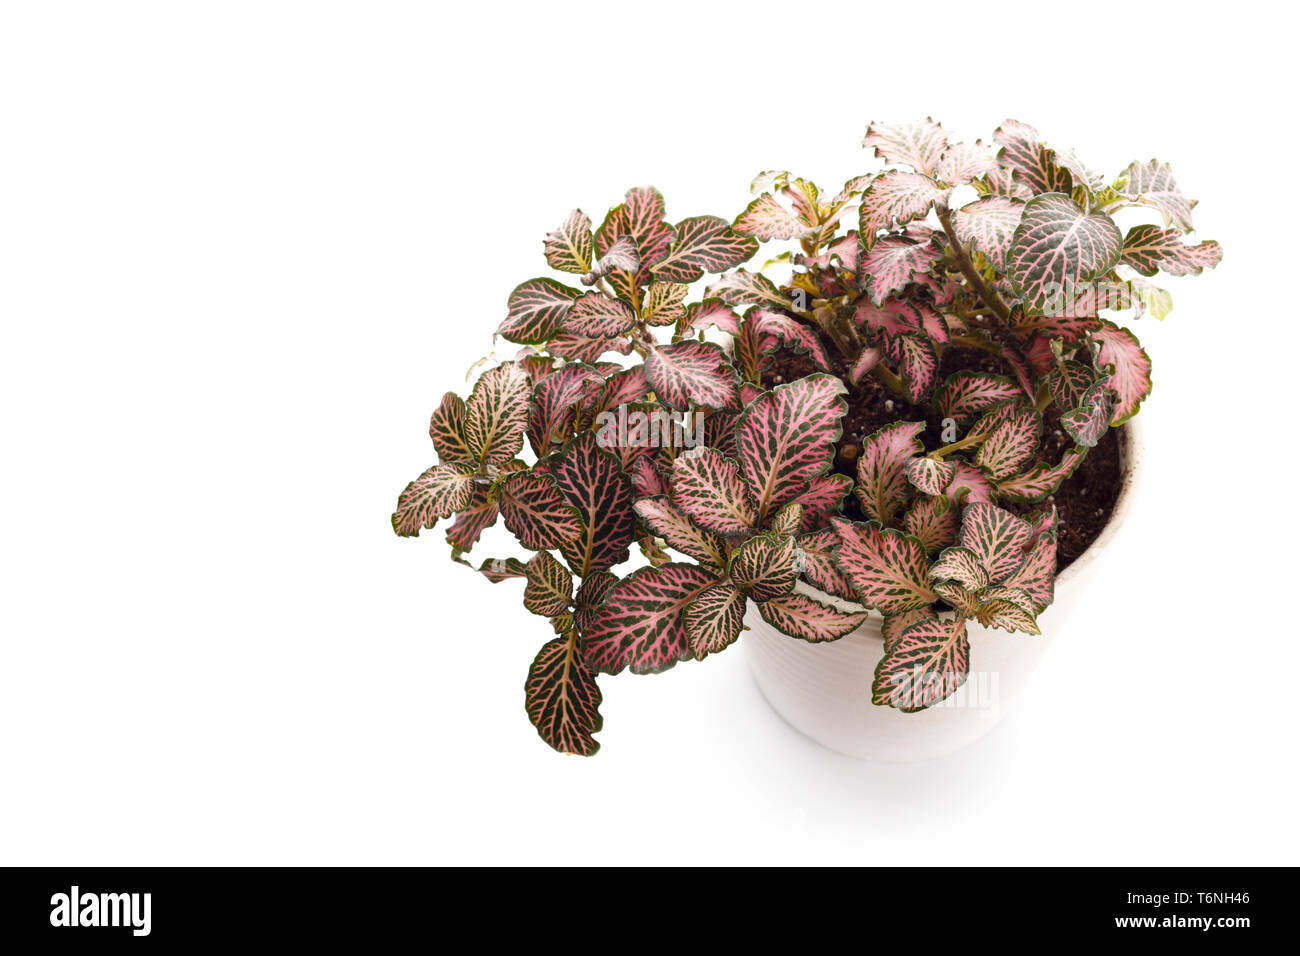 Houseplant fittonia with red leaves Stock Photo